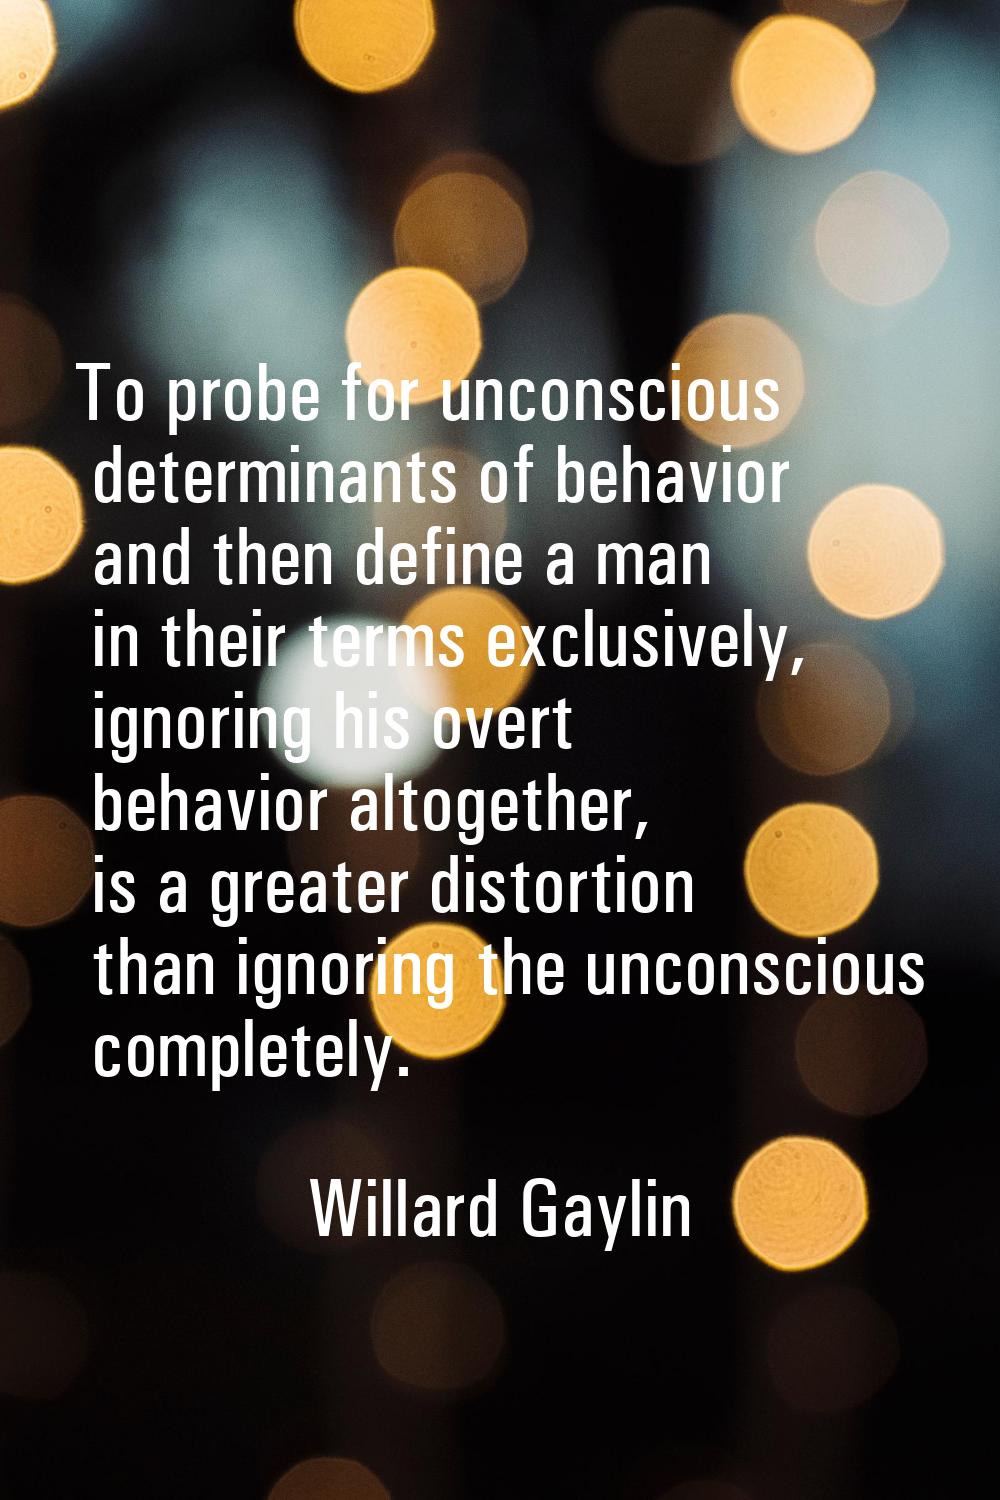 To probe for unconscious determinants of behavior and then define a man in their terms exclusively,